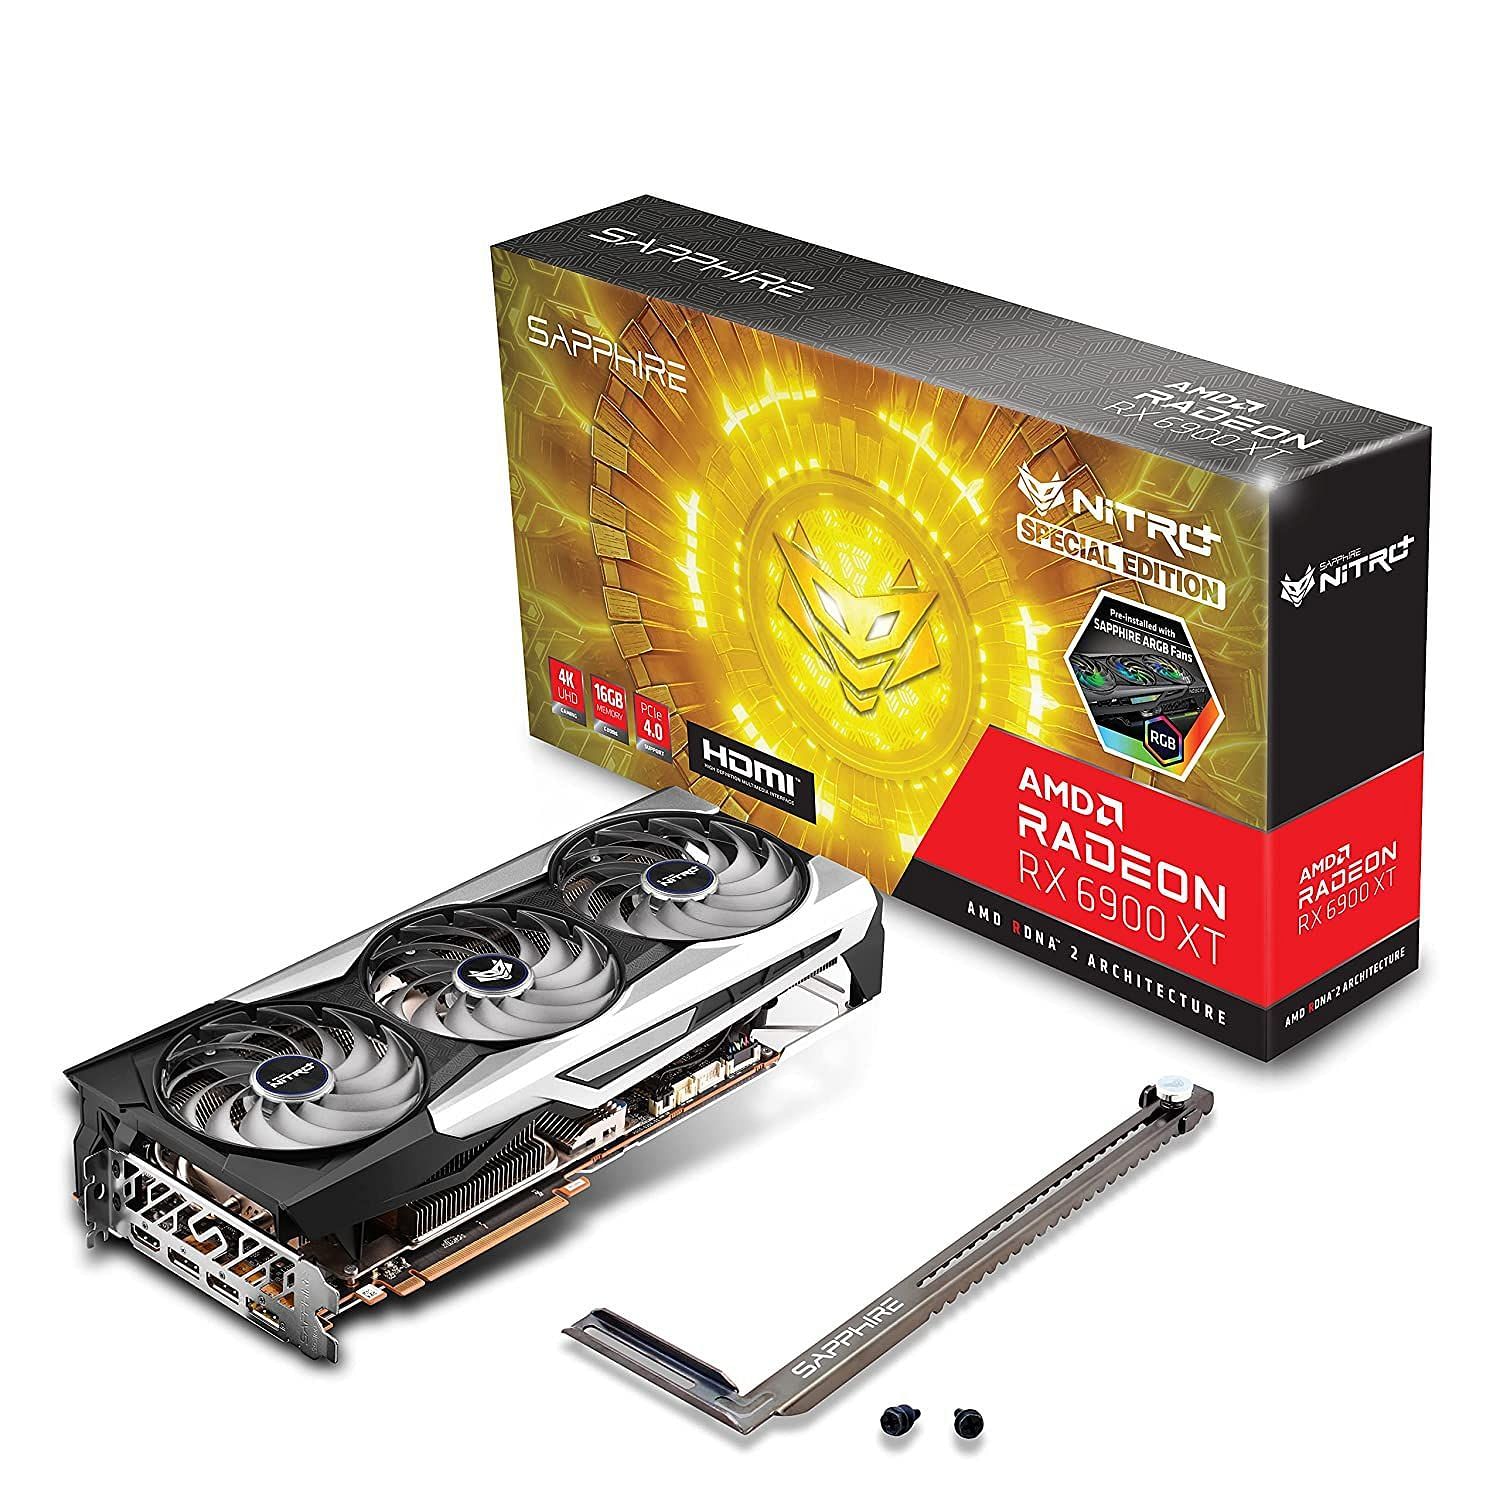 Sapphire manufactures some of the highest-quality Radeon video cards (Image via Sapphire)